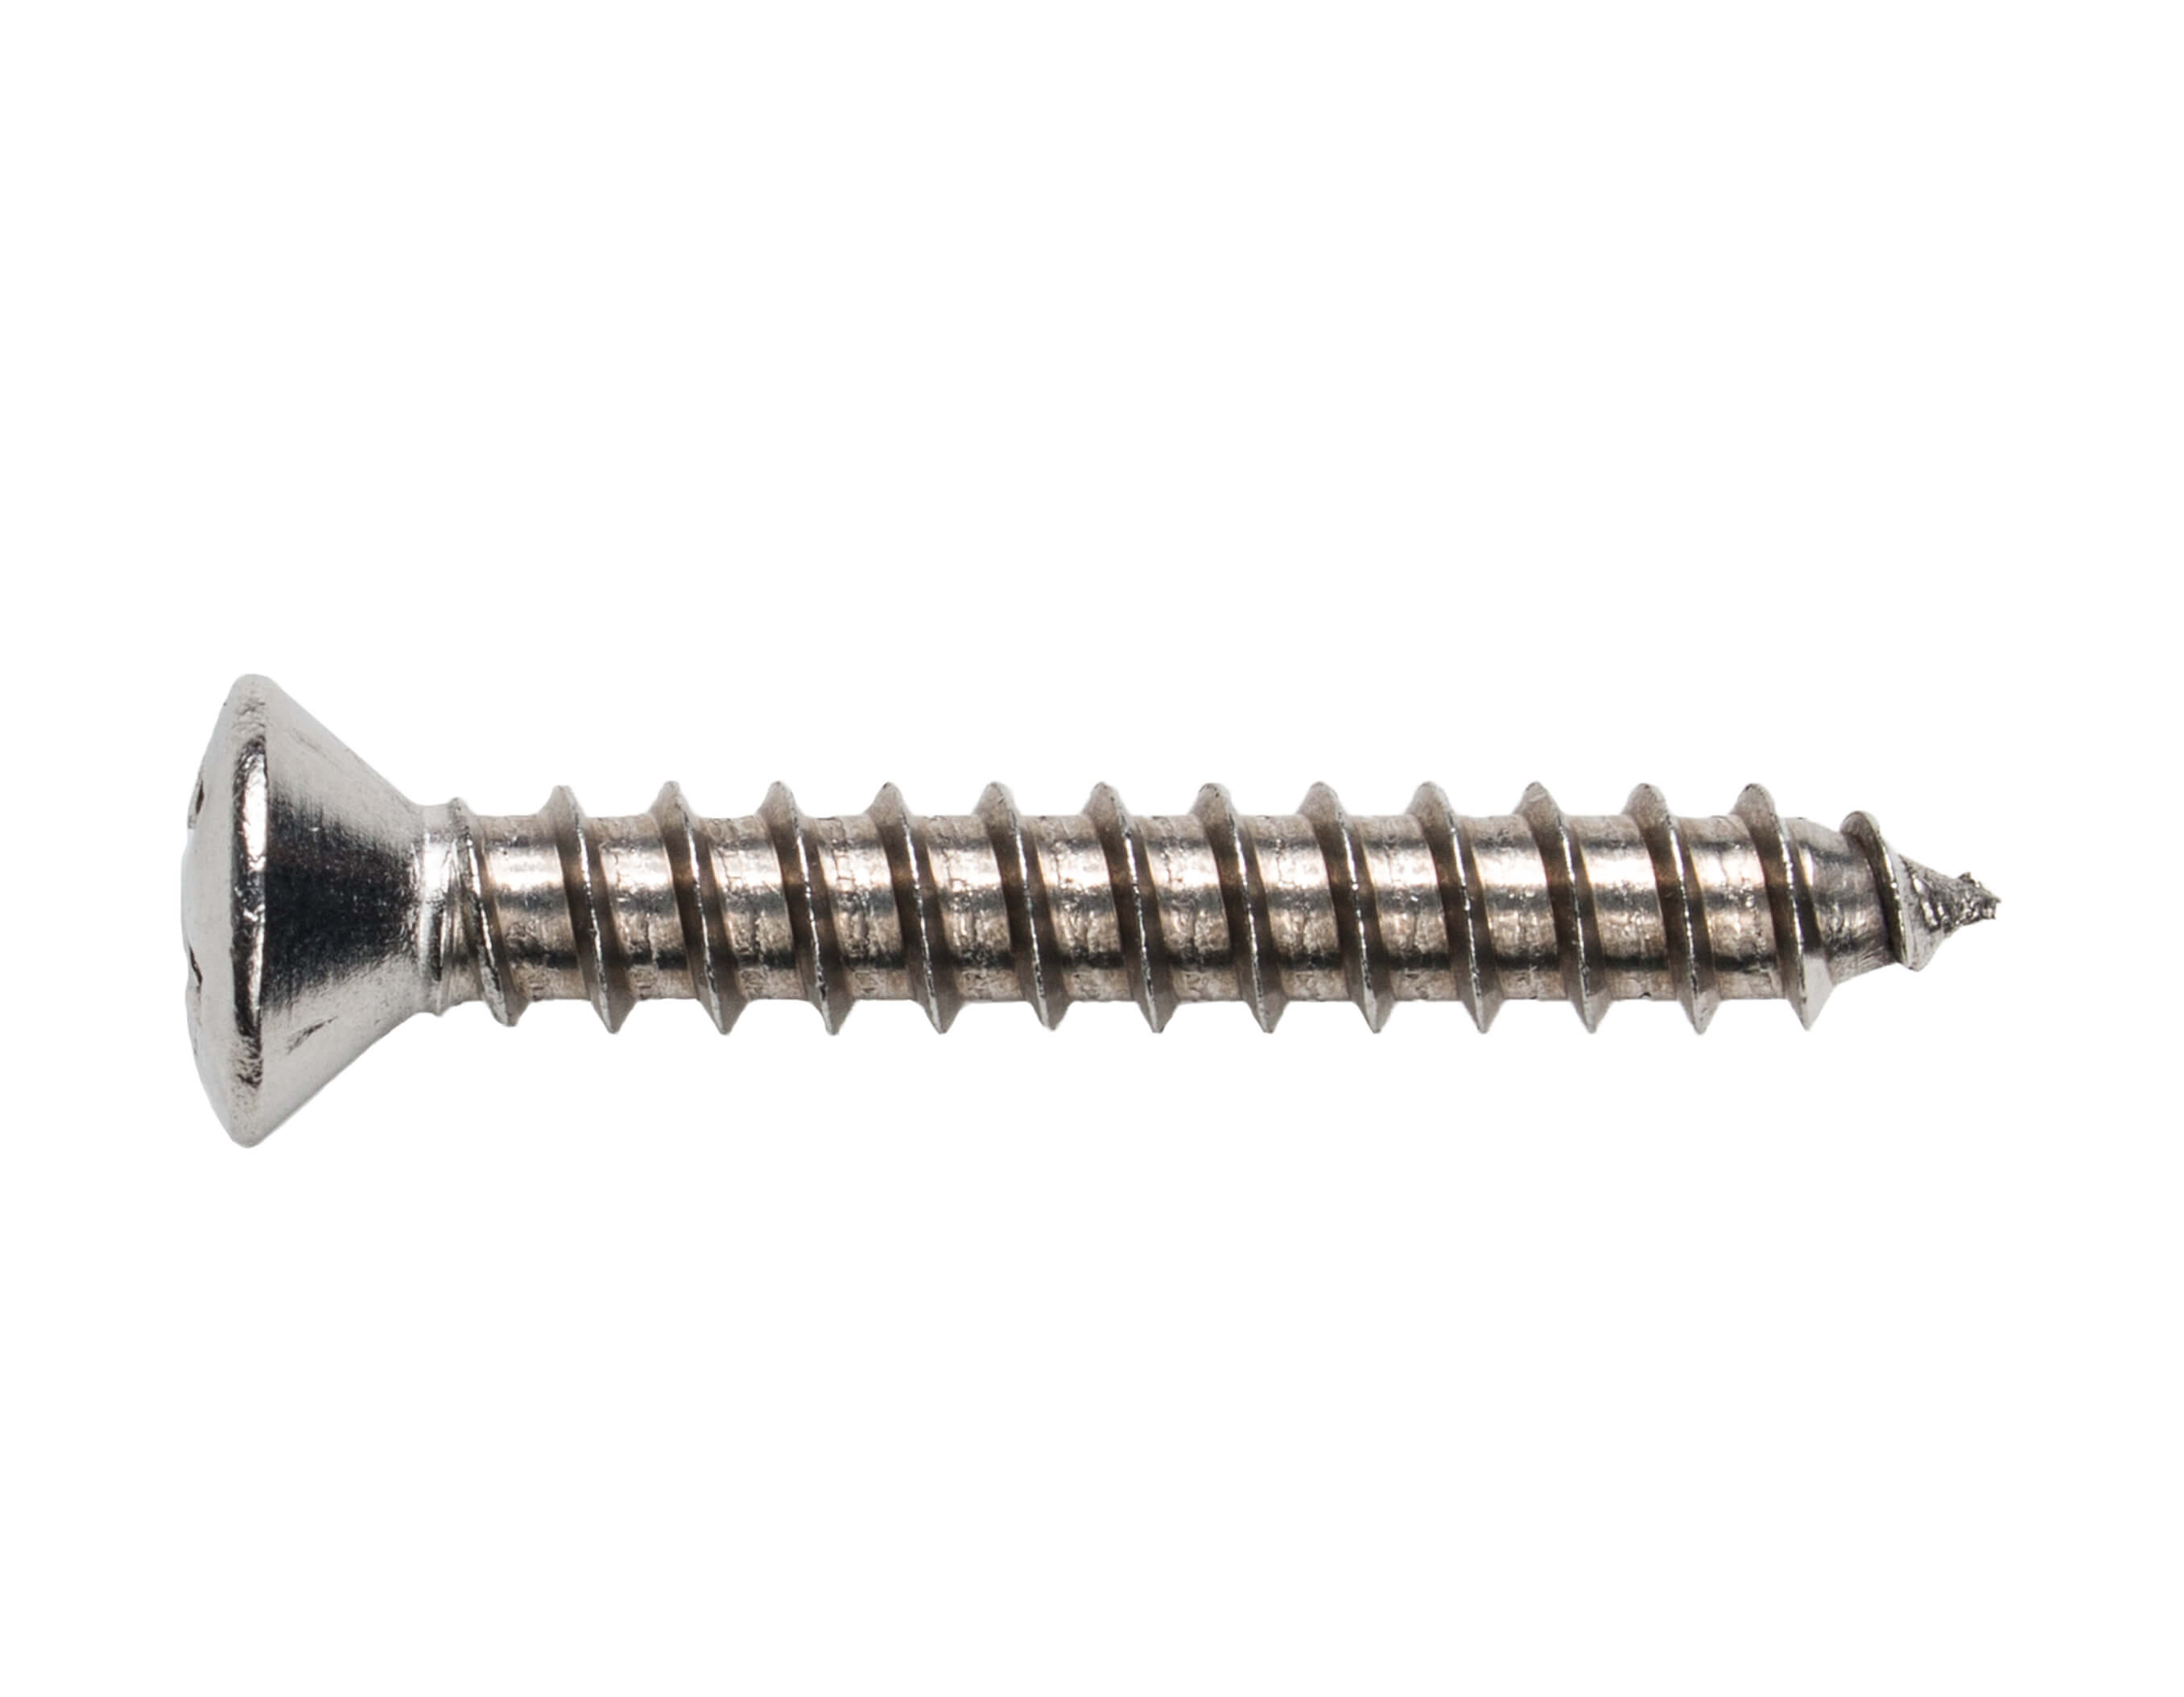 4.8X13 SMS (TAPPING) SCREW OVAL PH 18.8 SS